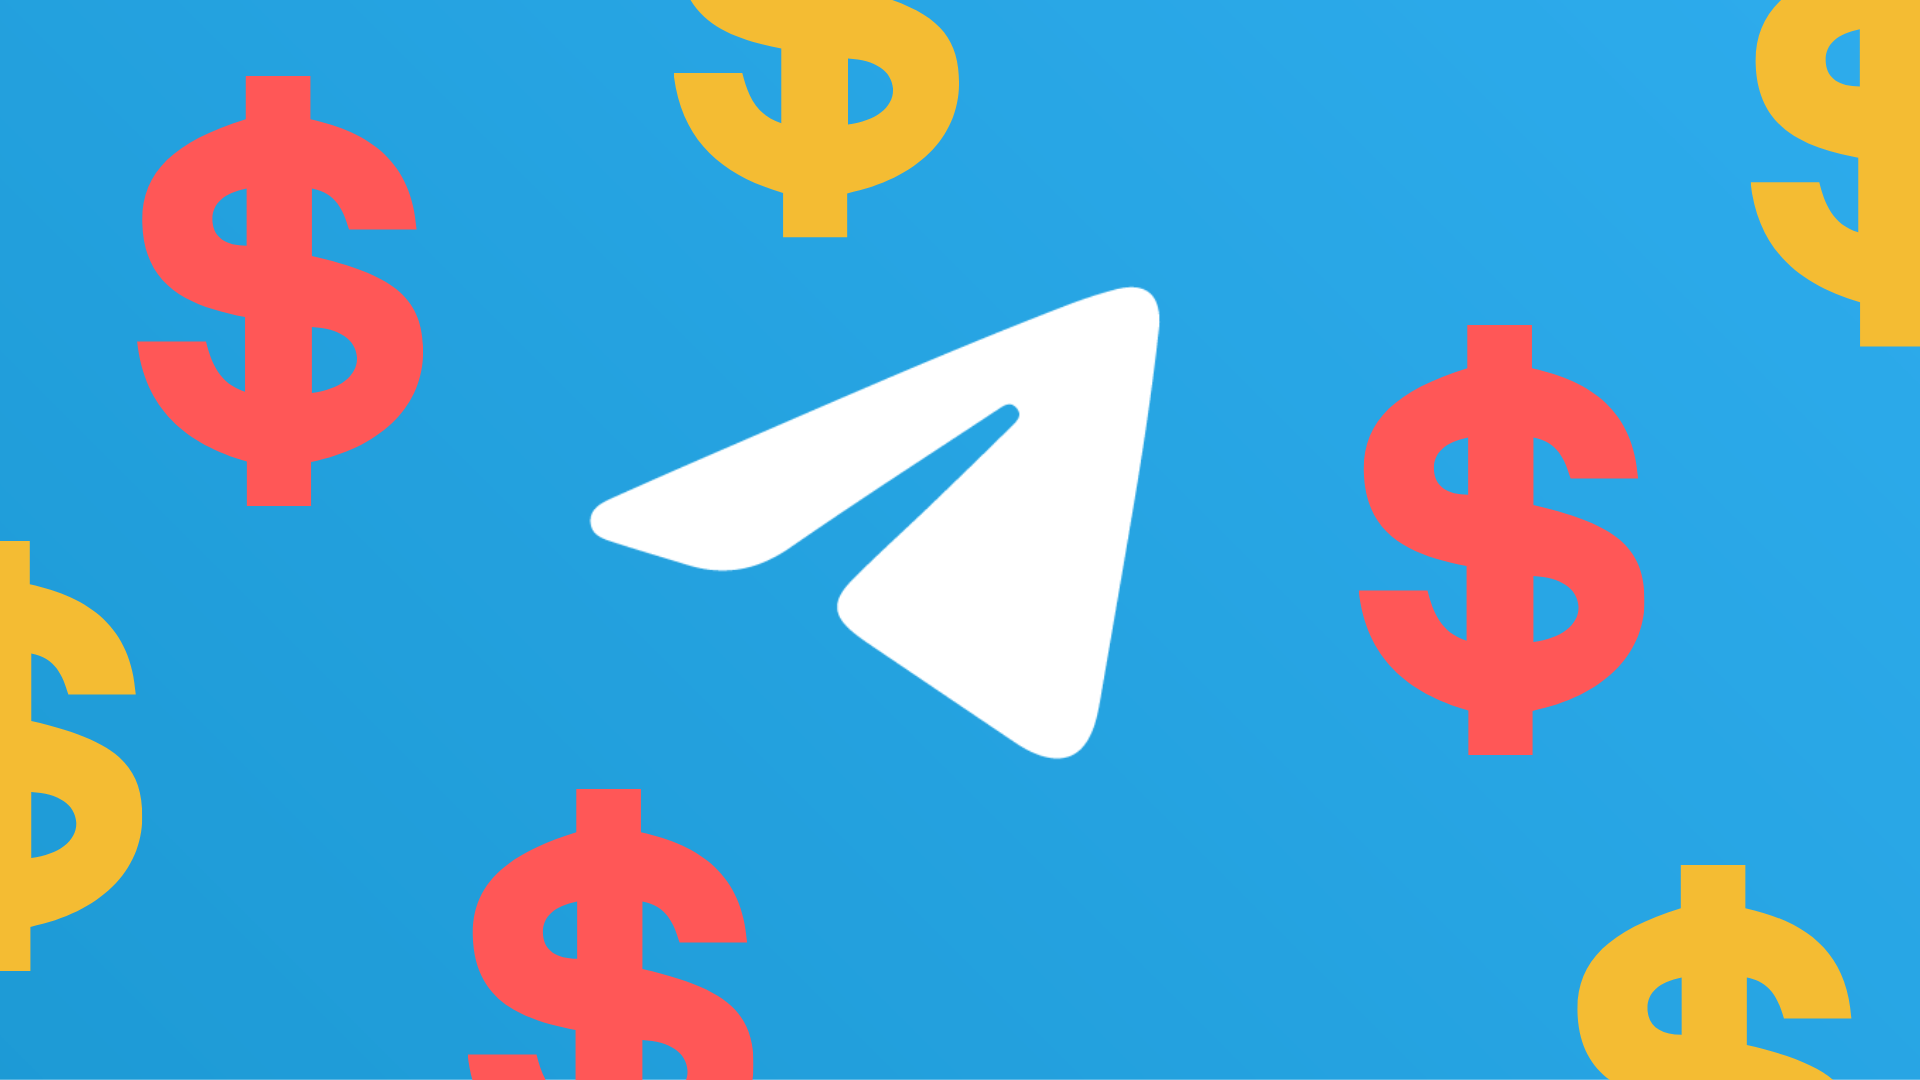 Telegram to offer paid features and own ad platform as it reaches 500 million active users